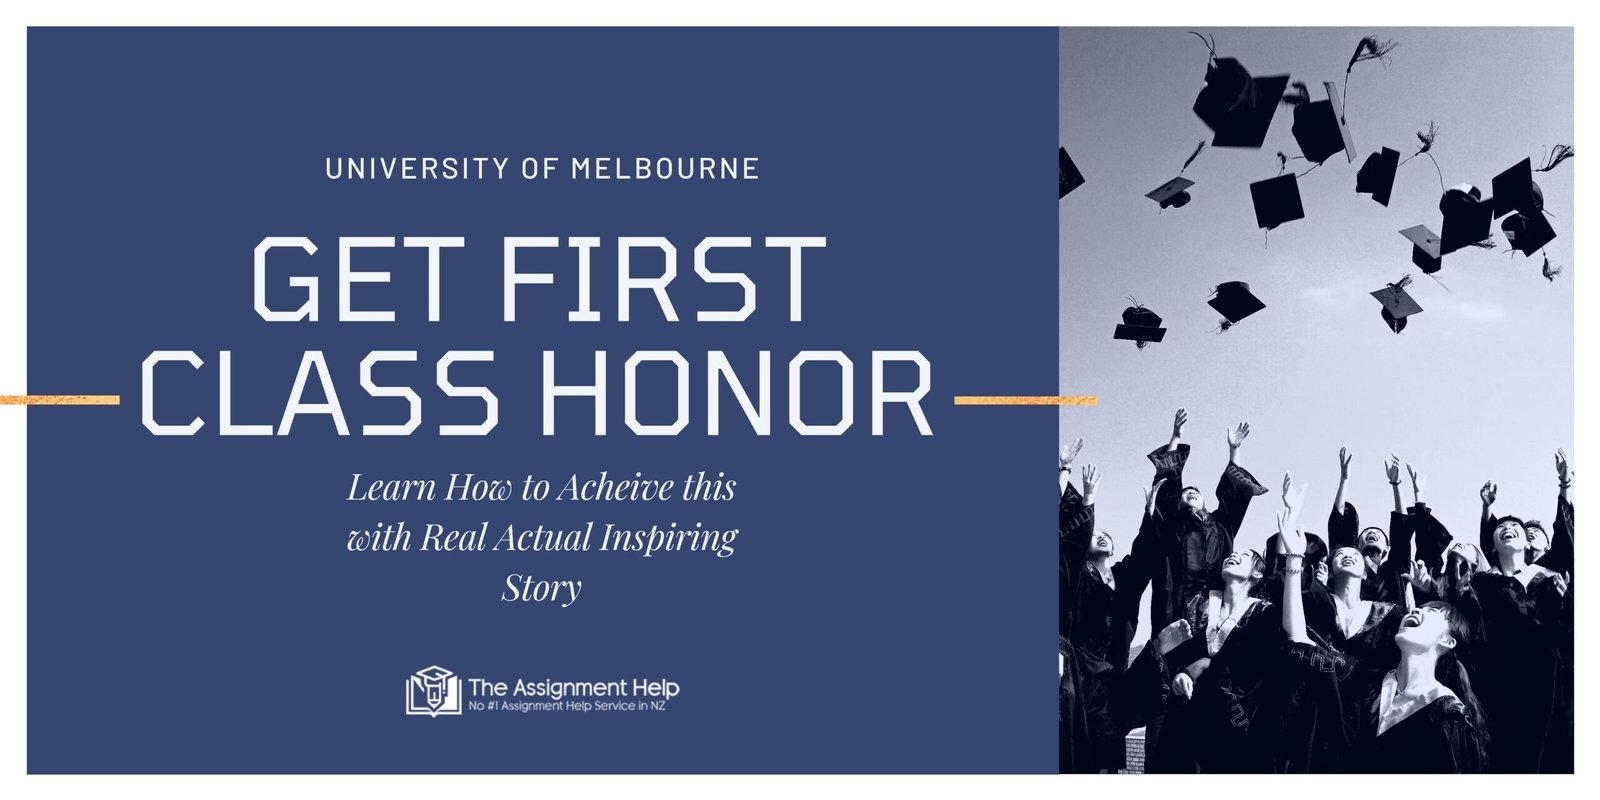 How to Get First Class Honor at The University of Melbourne?